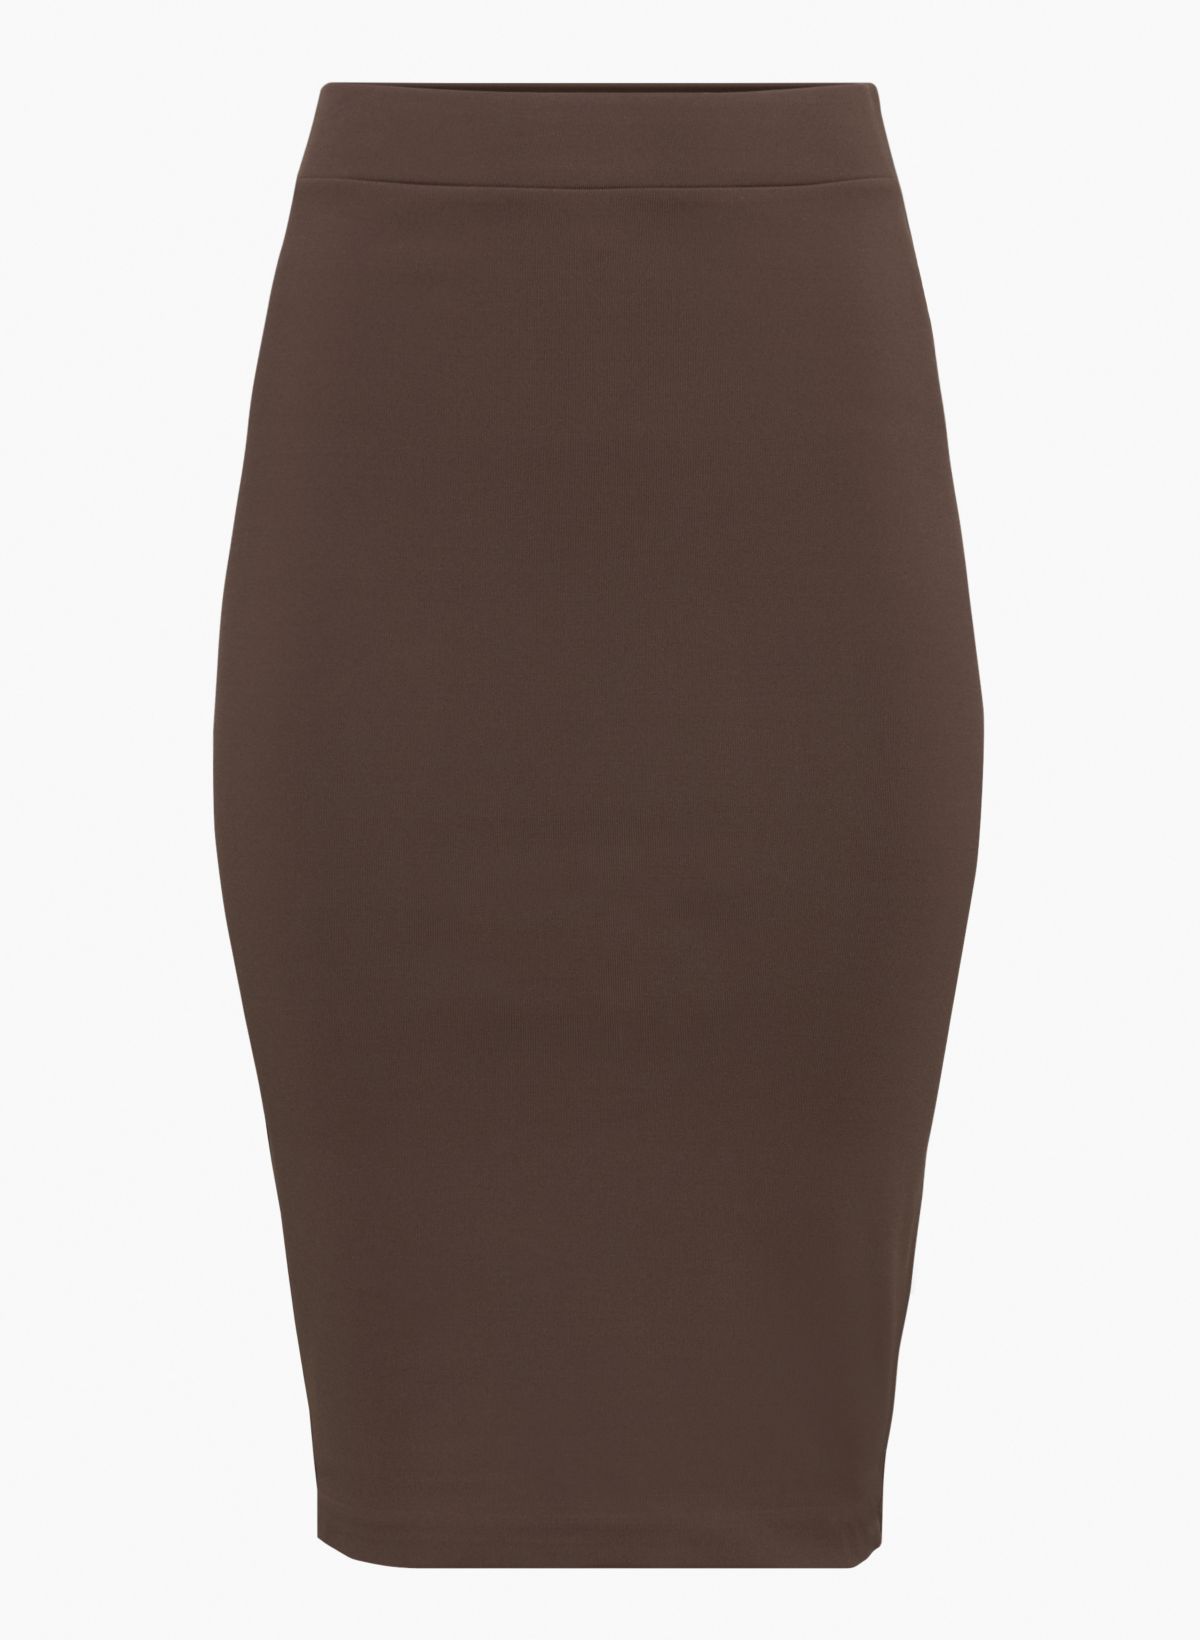 Women's patent leather pencil skirt CANDICE